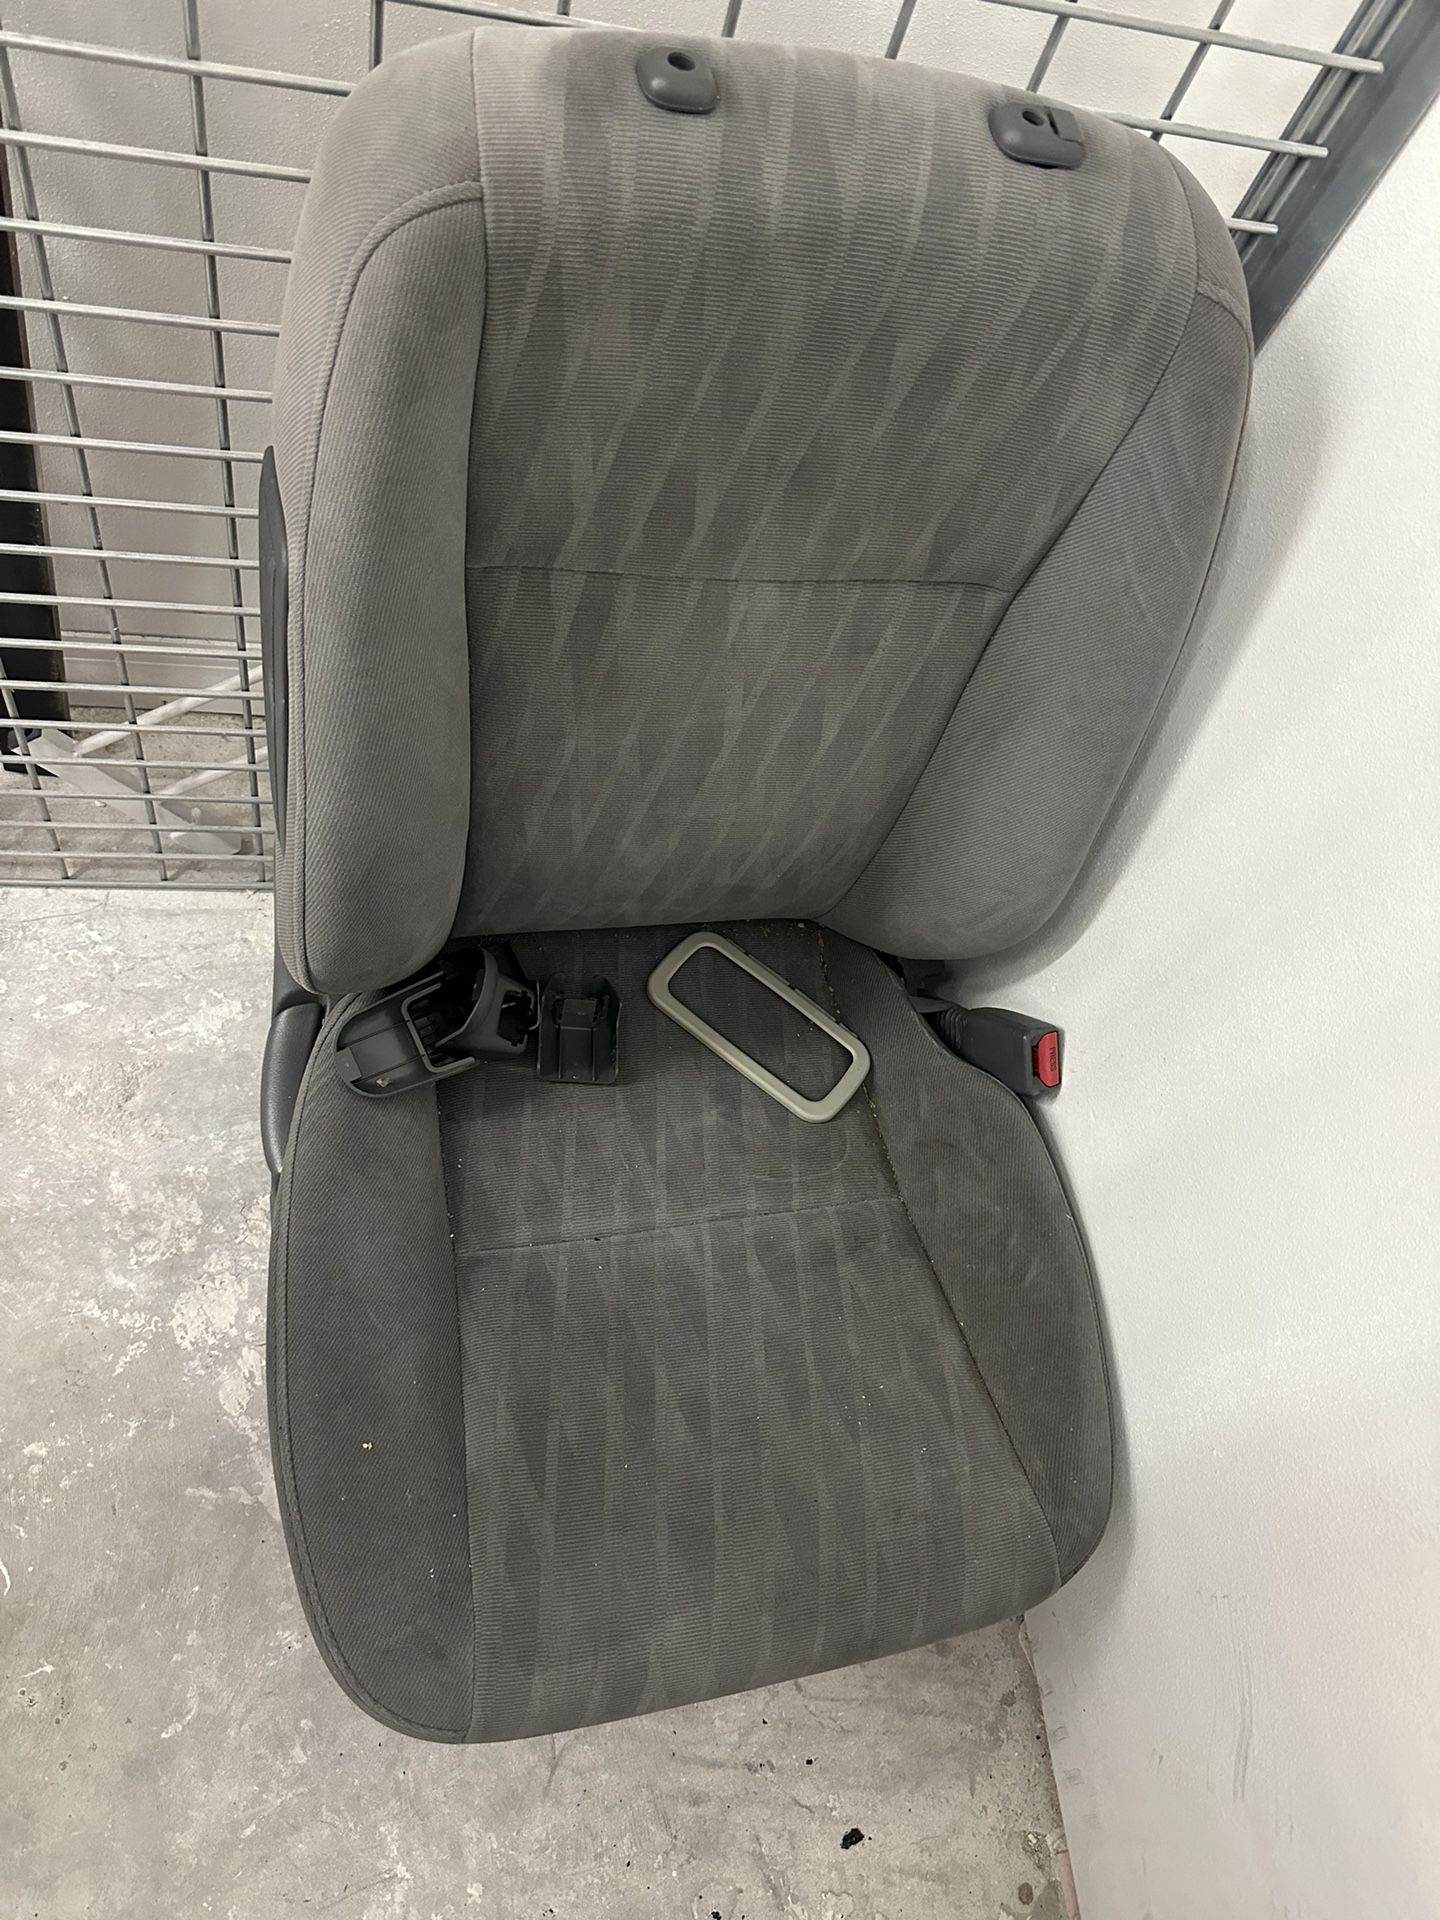 $10 Replacement Passenger Seat -PICK UP TODAY : Seat For Car- No Head Rest 